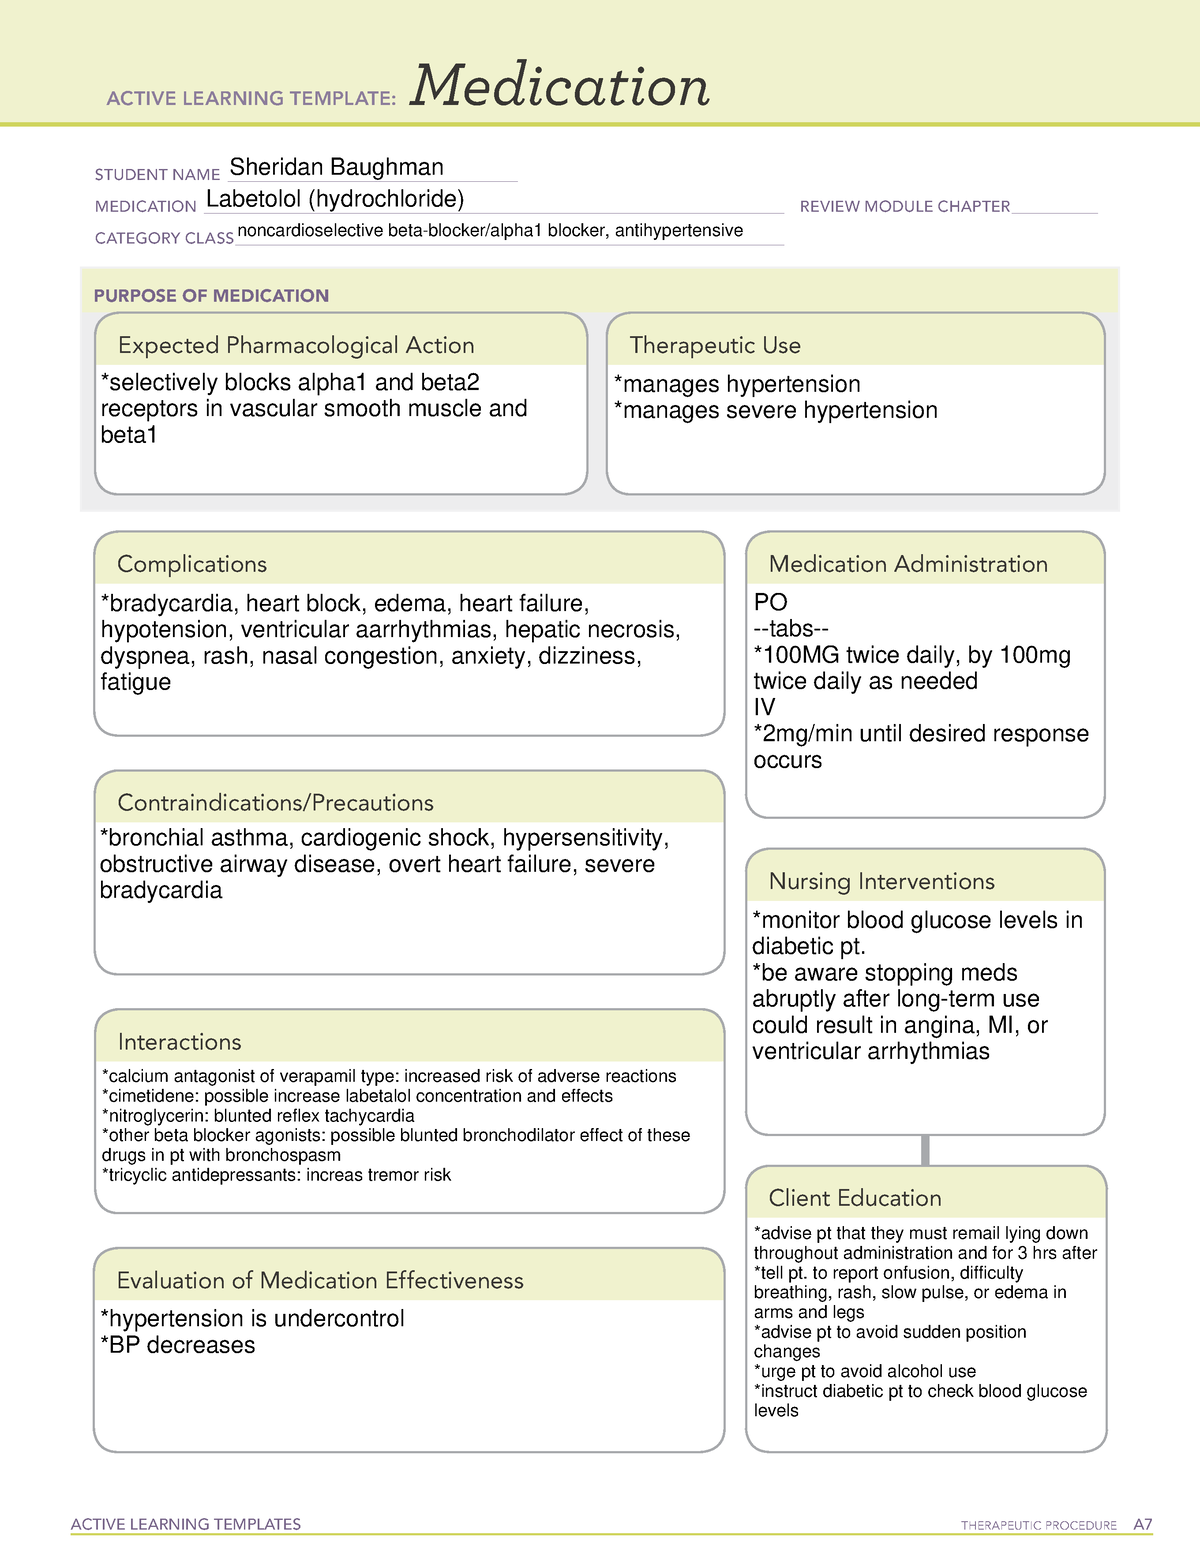 Labetalol drug card ACTIVE LEARNING TEMPLATES THERAPEUTIC PROCEDURE A